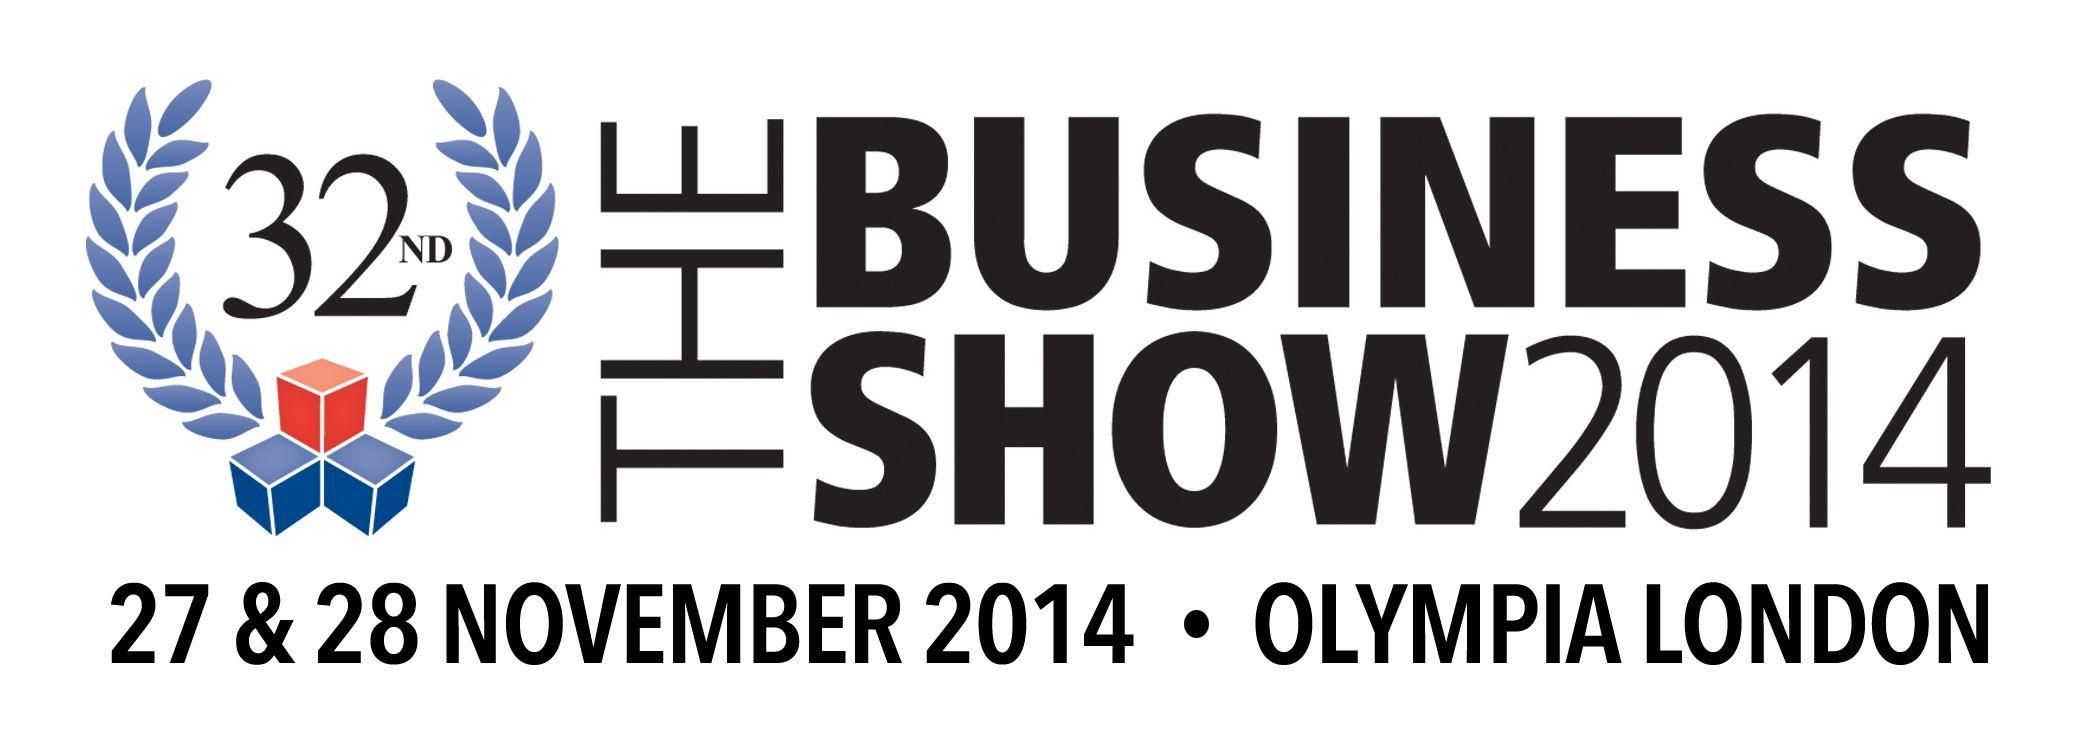 All Business Show Logo - The Business Show - Olympia 27/28 November 2014 - - Kent Ideas